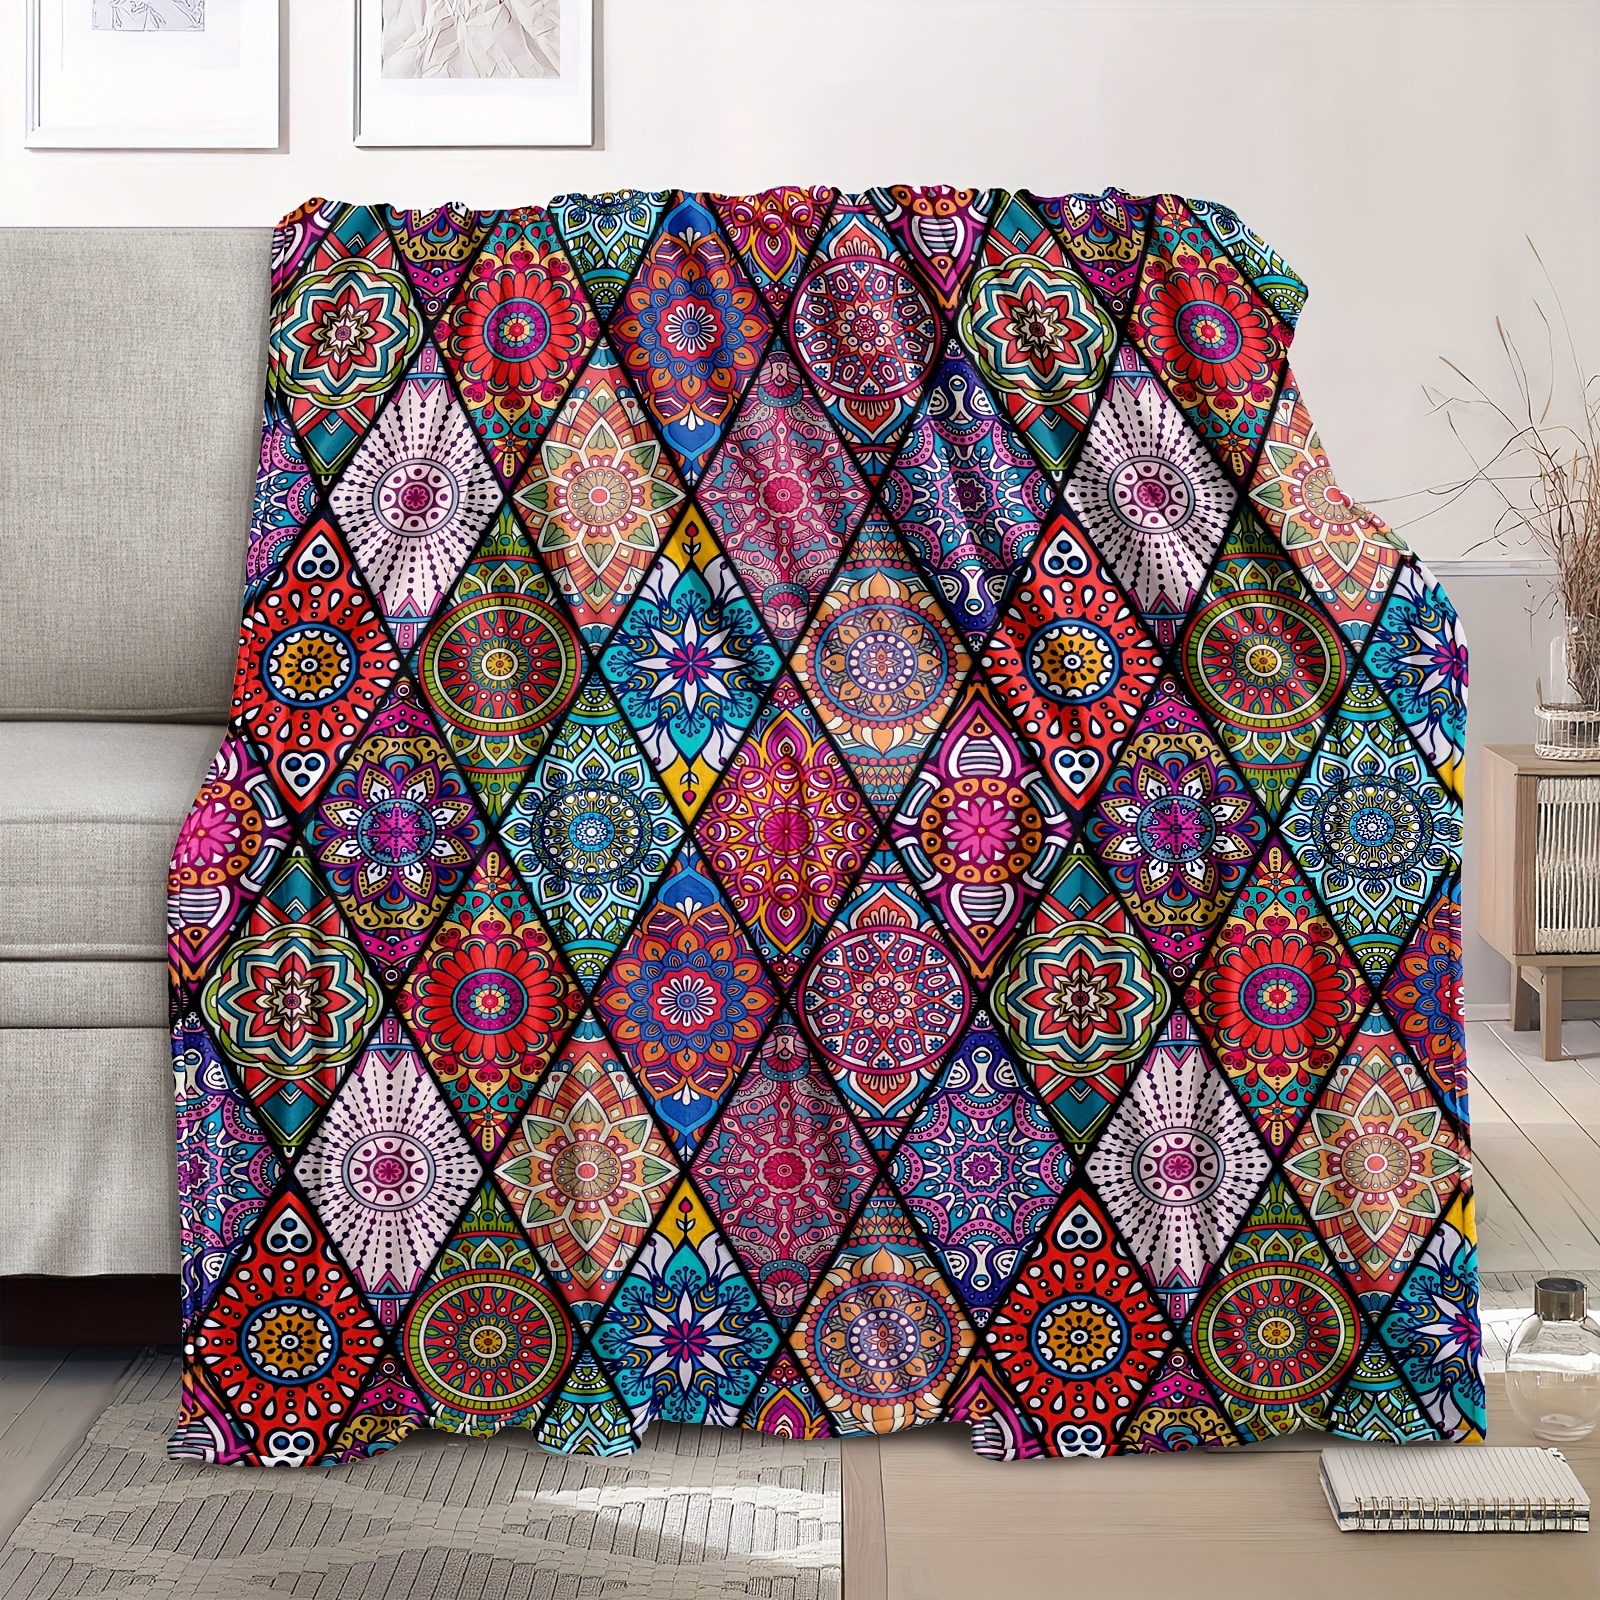 

1pc Flannel Throw Blanket, Boho Style Floral Pattern Printed Blanket, Warm Cozy Soft Blanket For Couch Bed Sofa Car Office Camping Travelling, Gift Blanket Suitable For All Seasons Ramadan